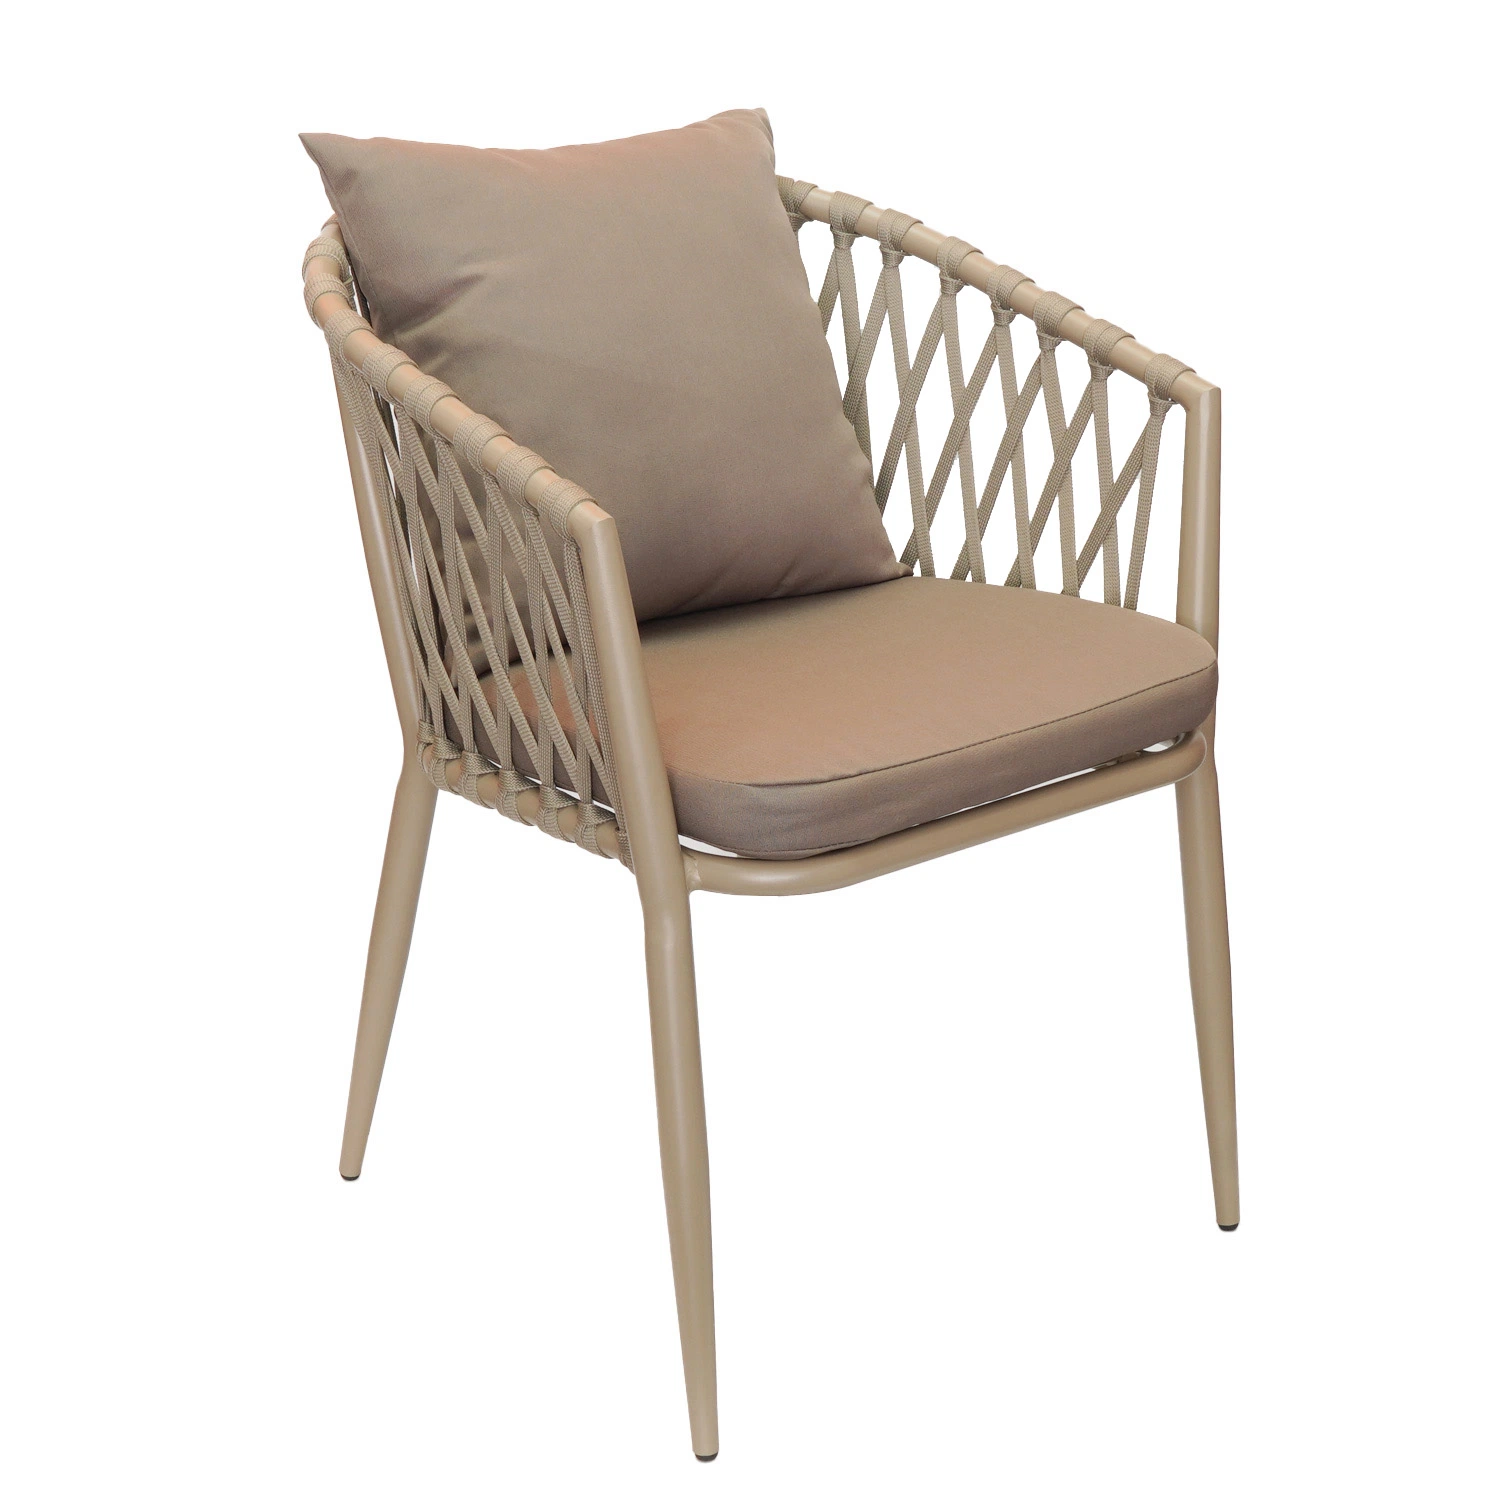 Outdoor Patio Dining Woven Furniture Stackable Rope Weave Wicker Indoor Dining Garden Chair Outdoor Dining Chair with Cushion